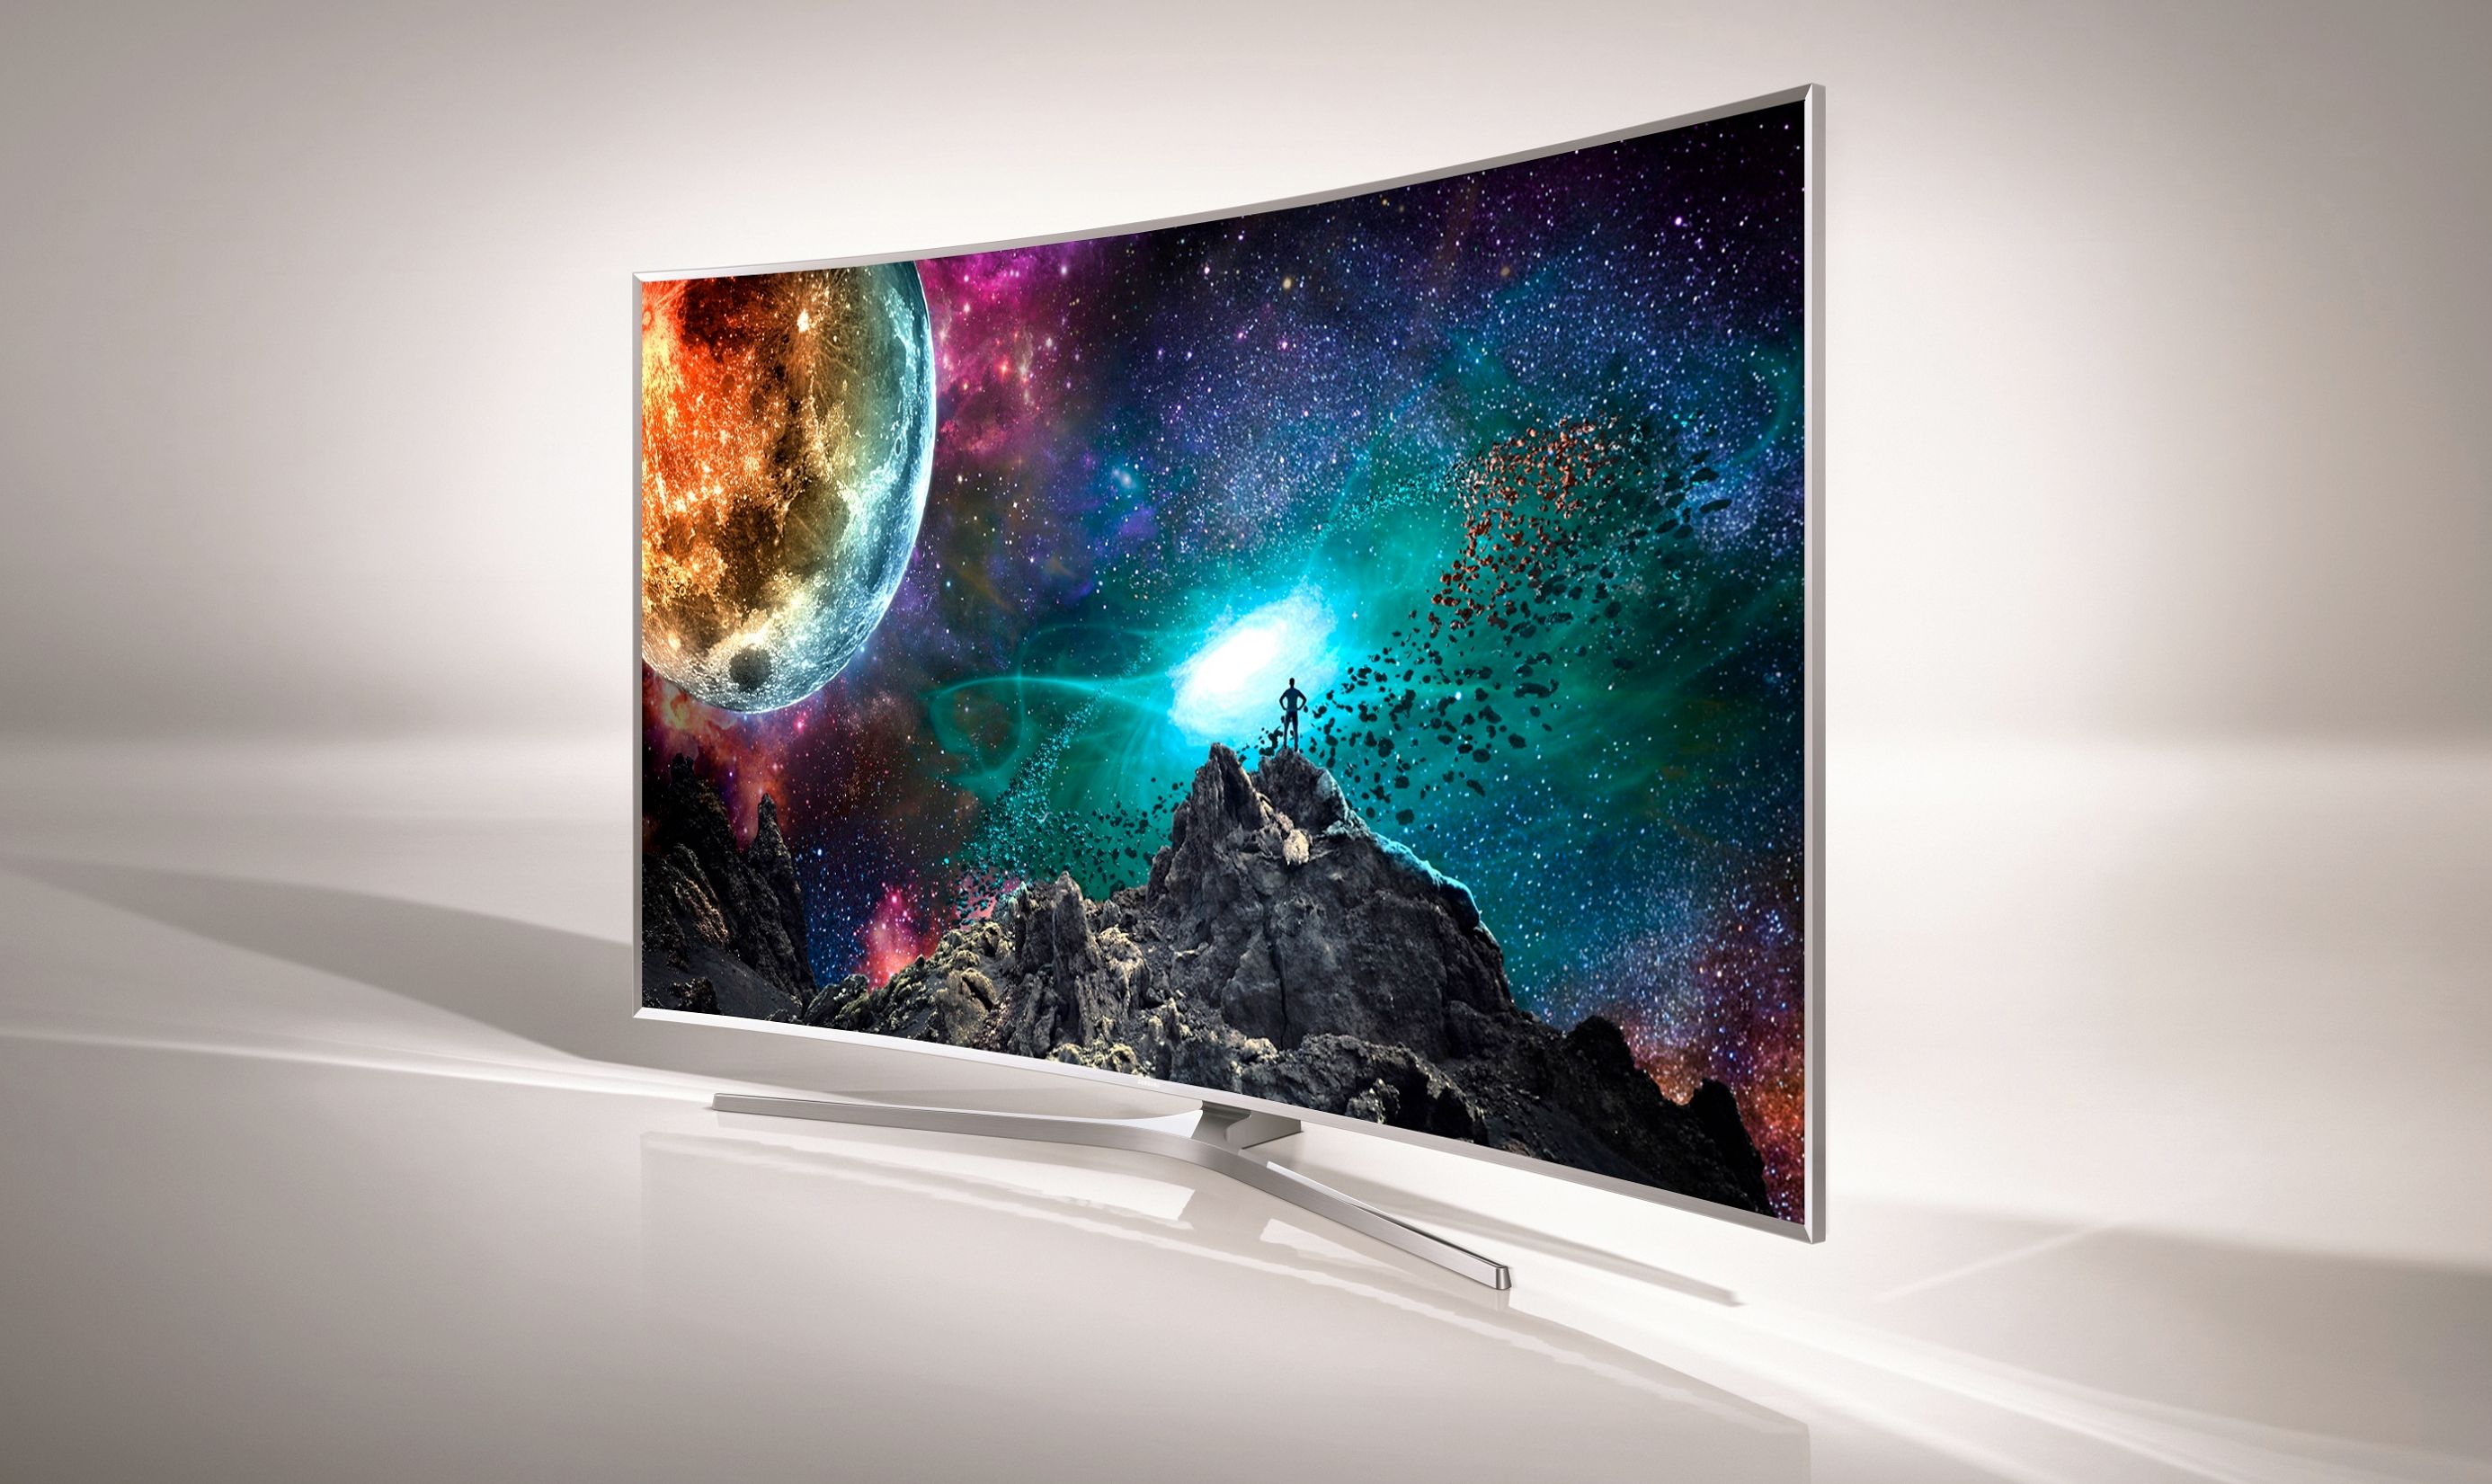 samsung says no to oled tvs for 2017 something else is coming image 1